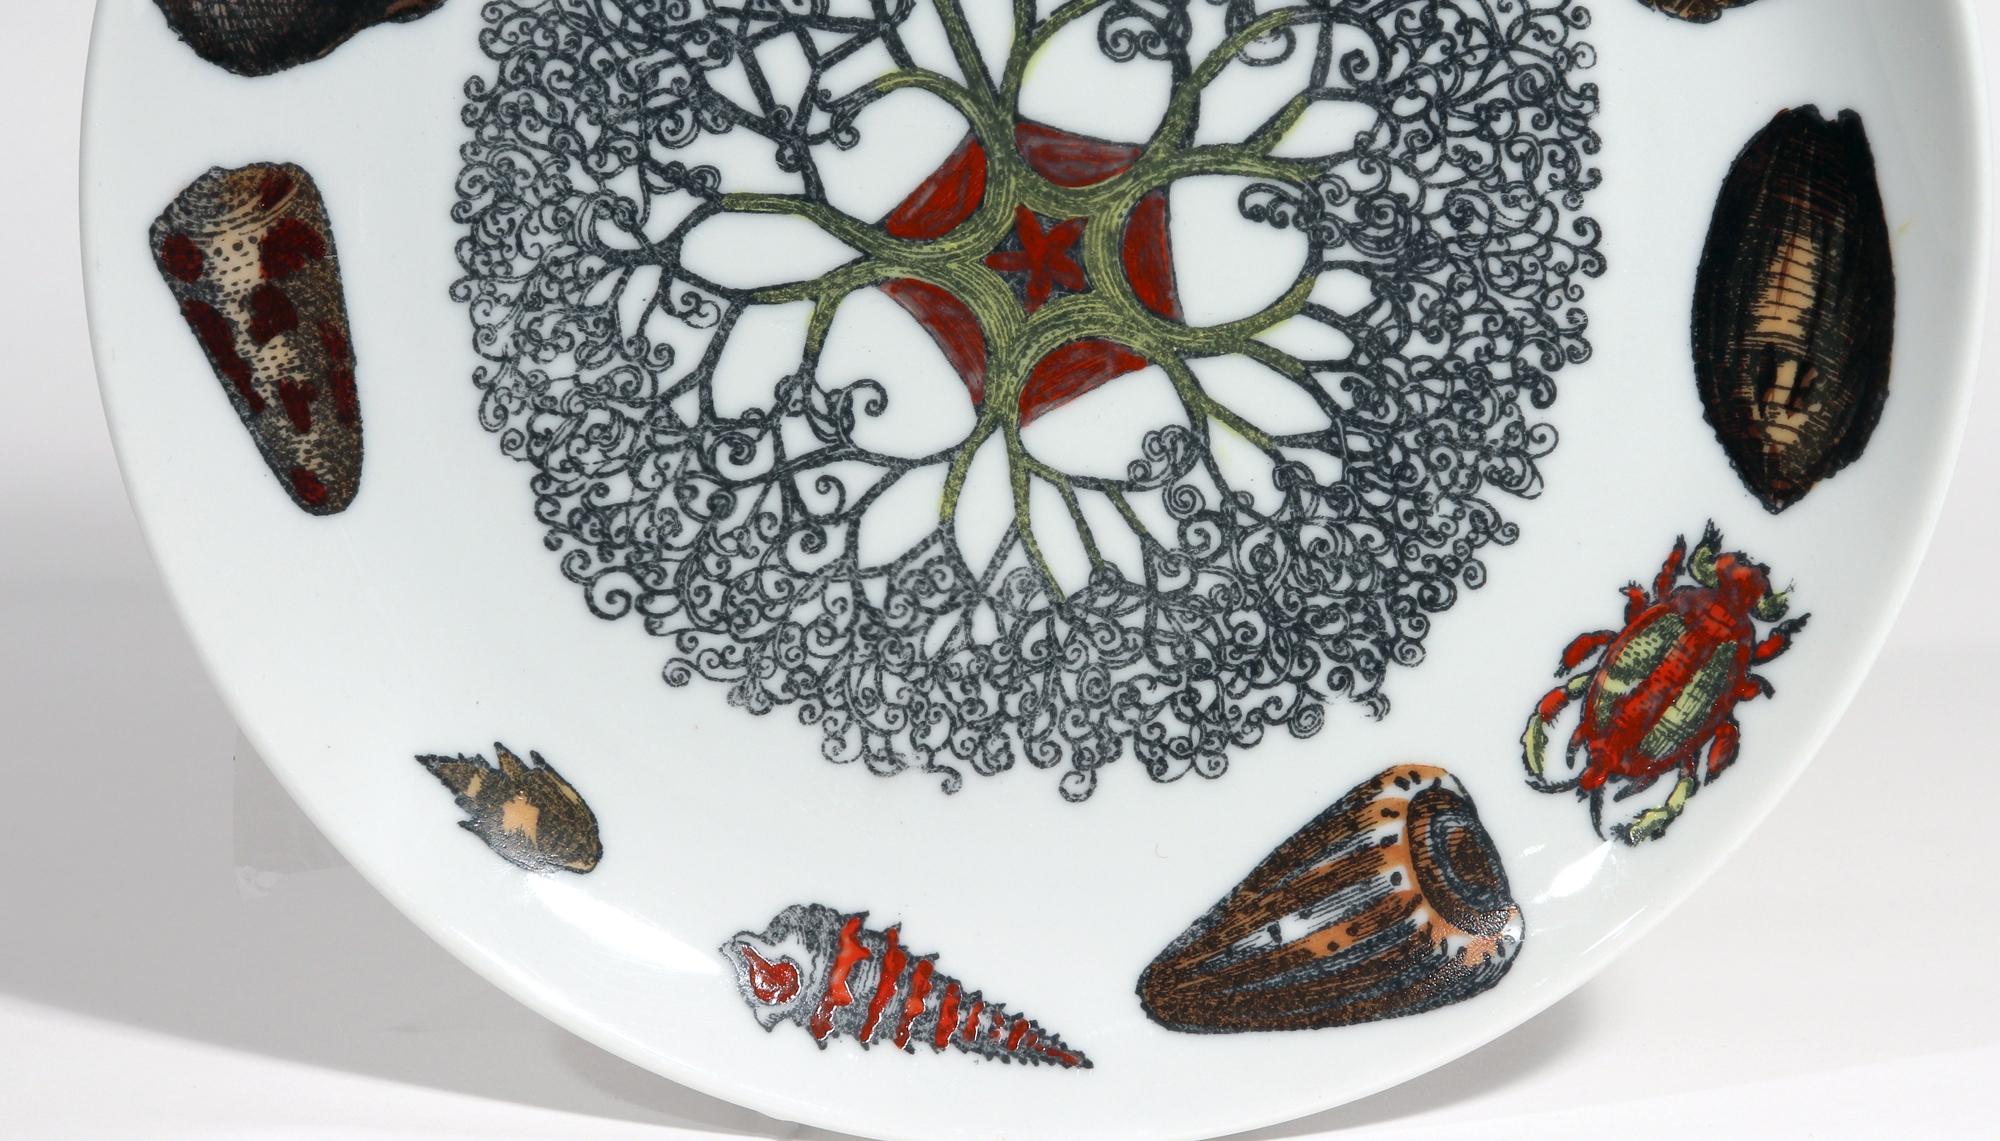 Piero Fornasetti Porcelain Conchiglie Seashell Plate with Mollusks, #9 For Sale 3